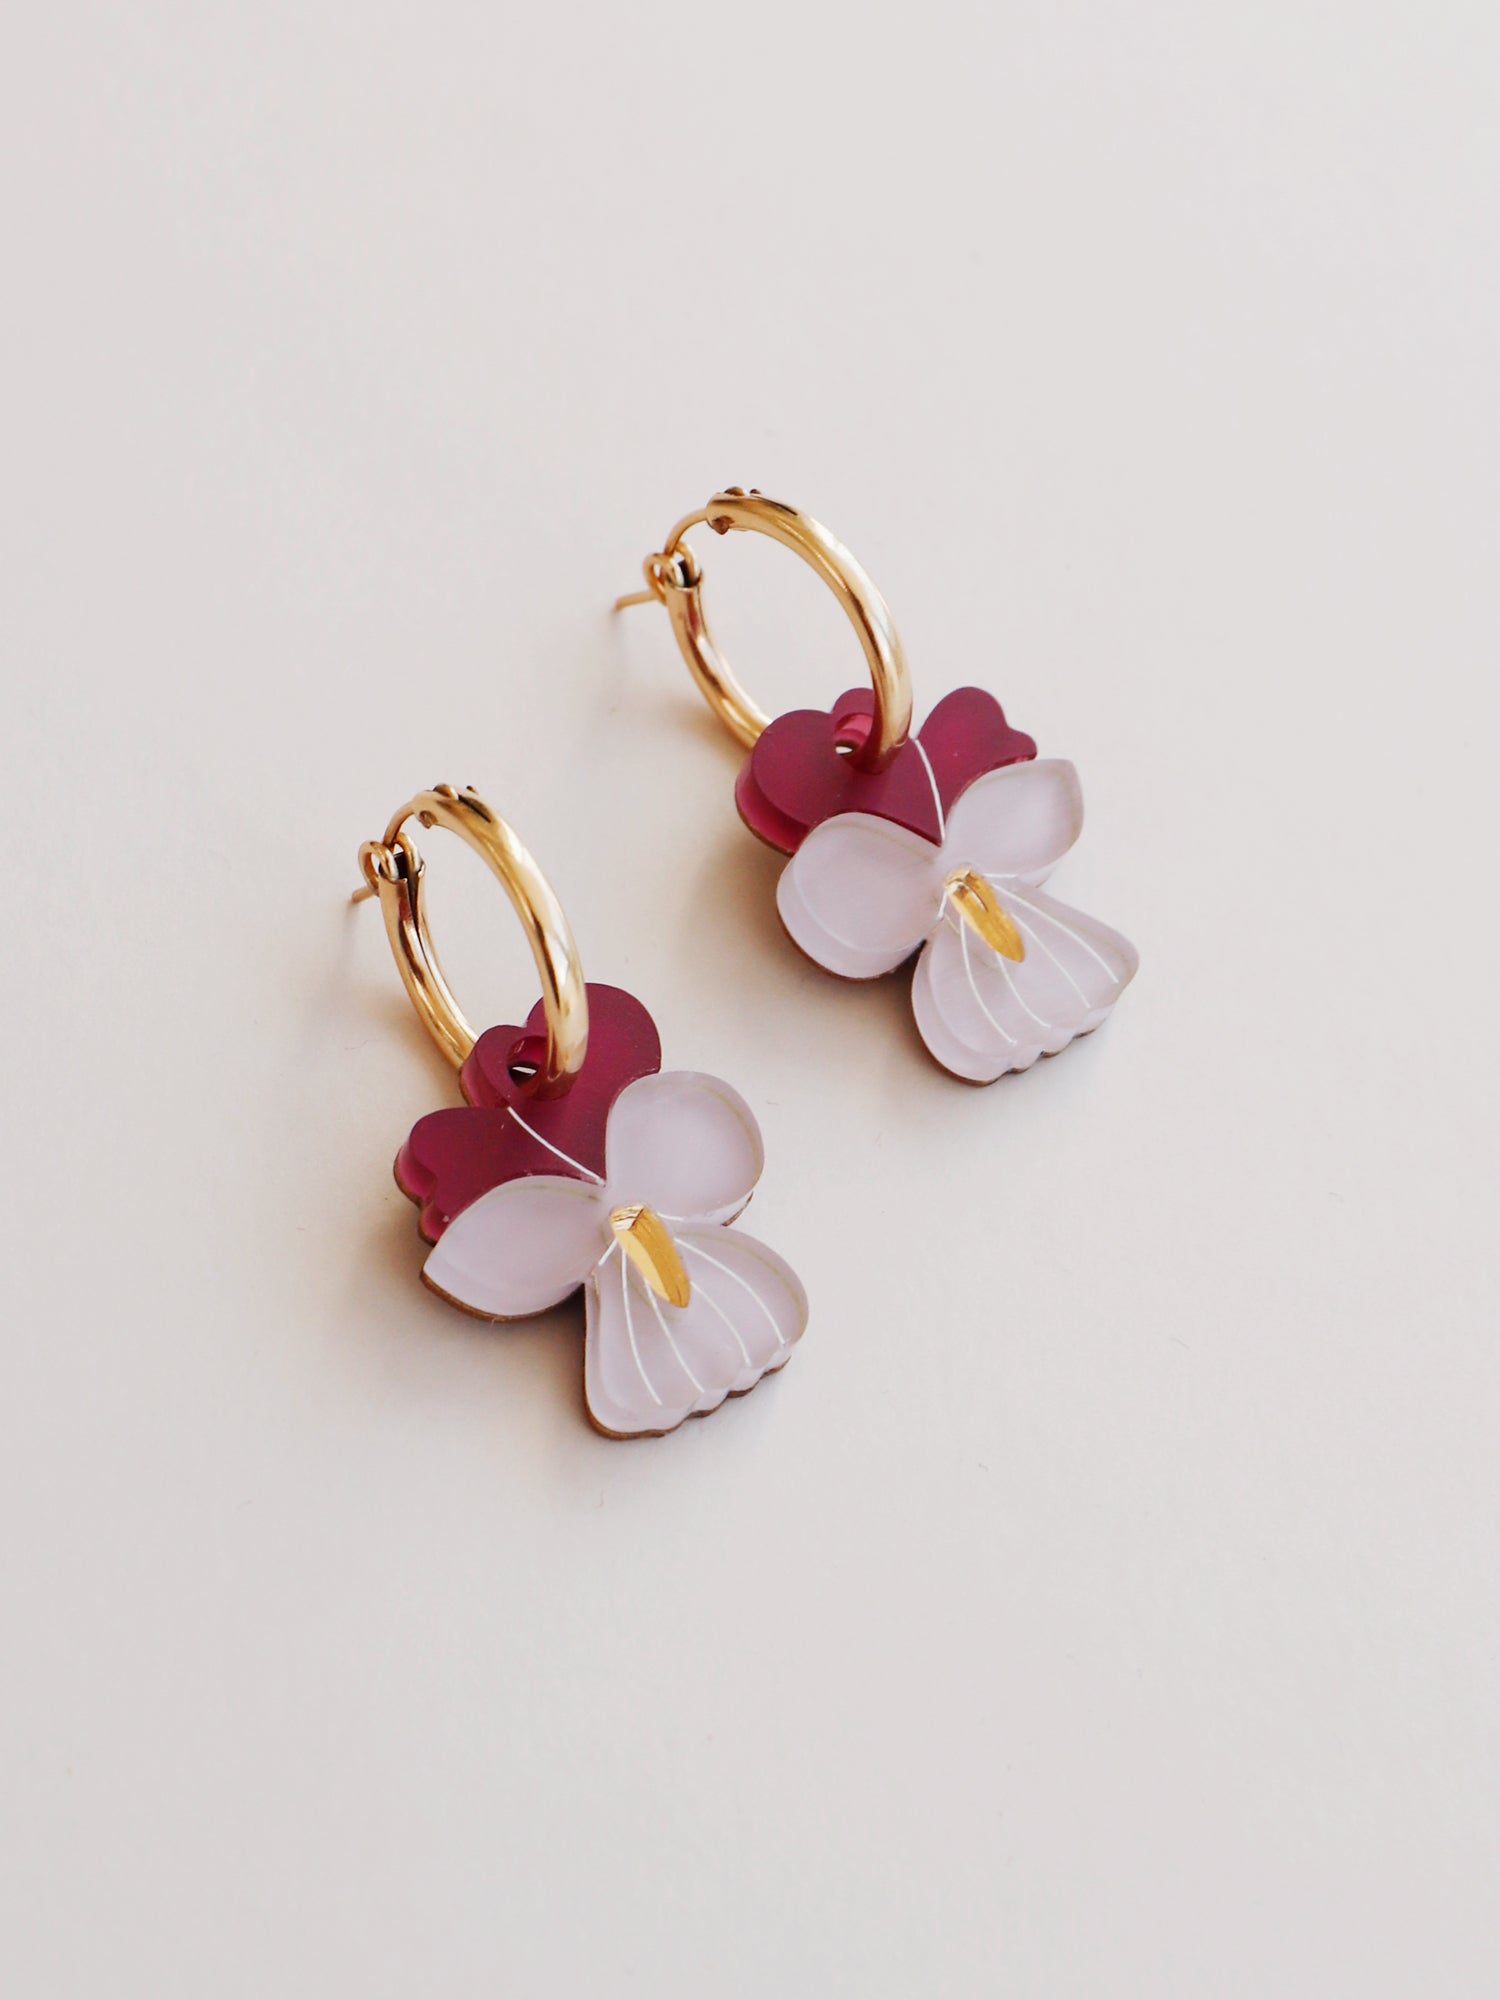 Violet hoop earrings made with wood, 64% recycled acrylic and hand-inked details on 14k gold-filled hoops (optional). Handmade in the UK by Wolf & Moon.